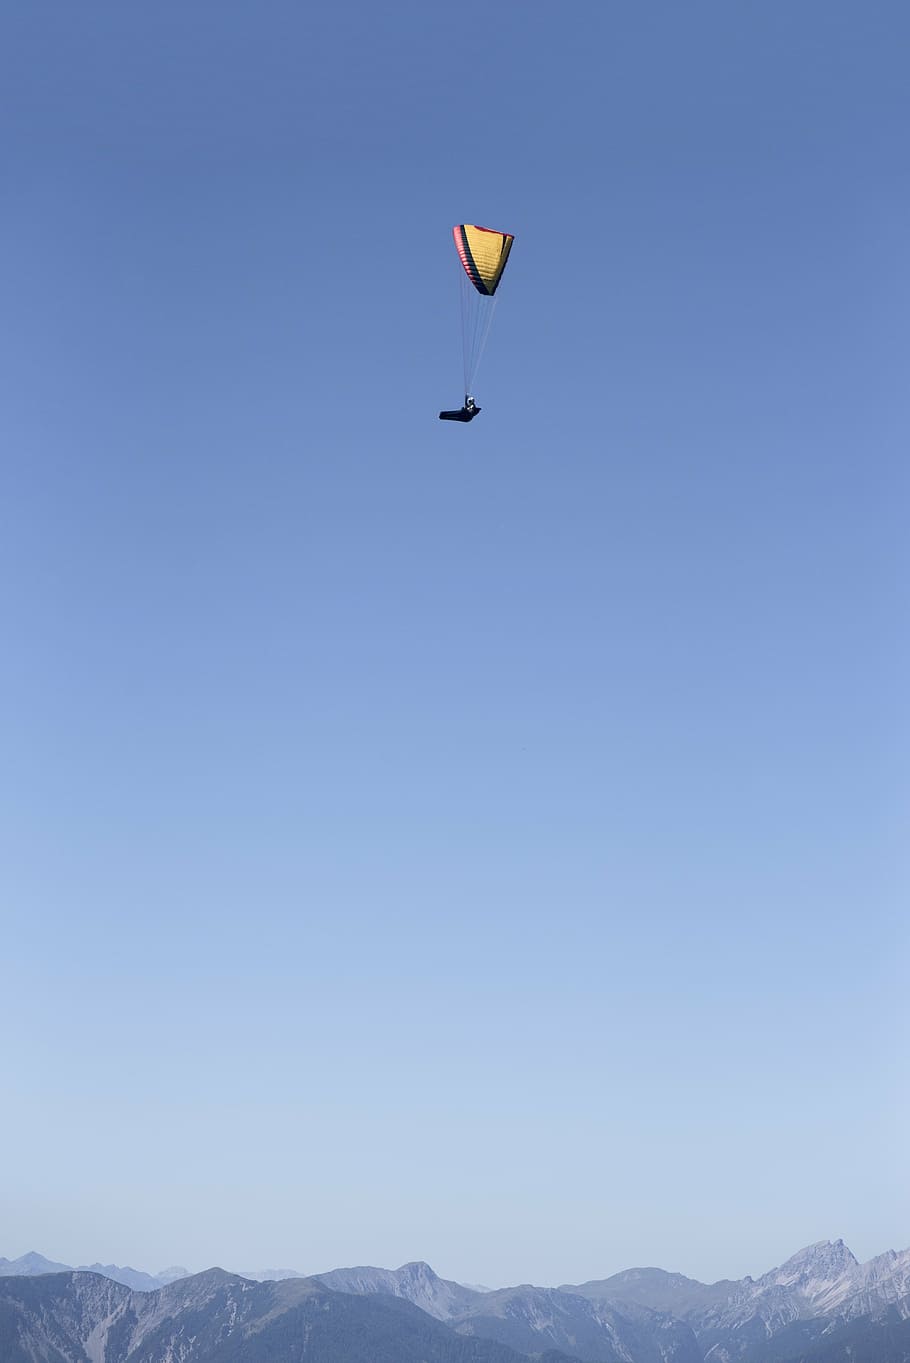 fly, paragliding, dom, hobby, flight, leisure, sky, paraglider, mountains, carinthia